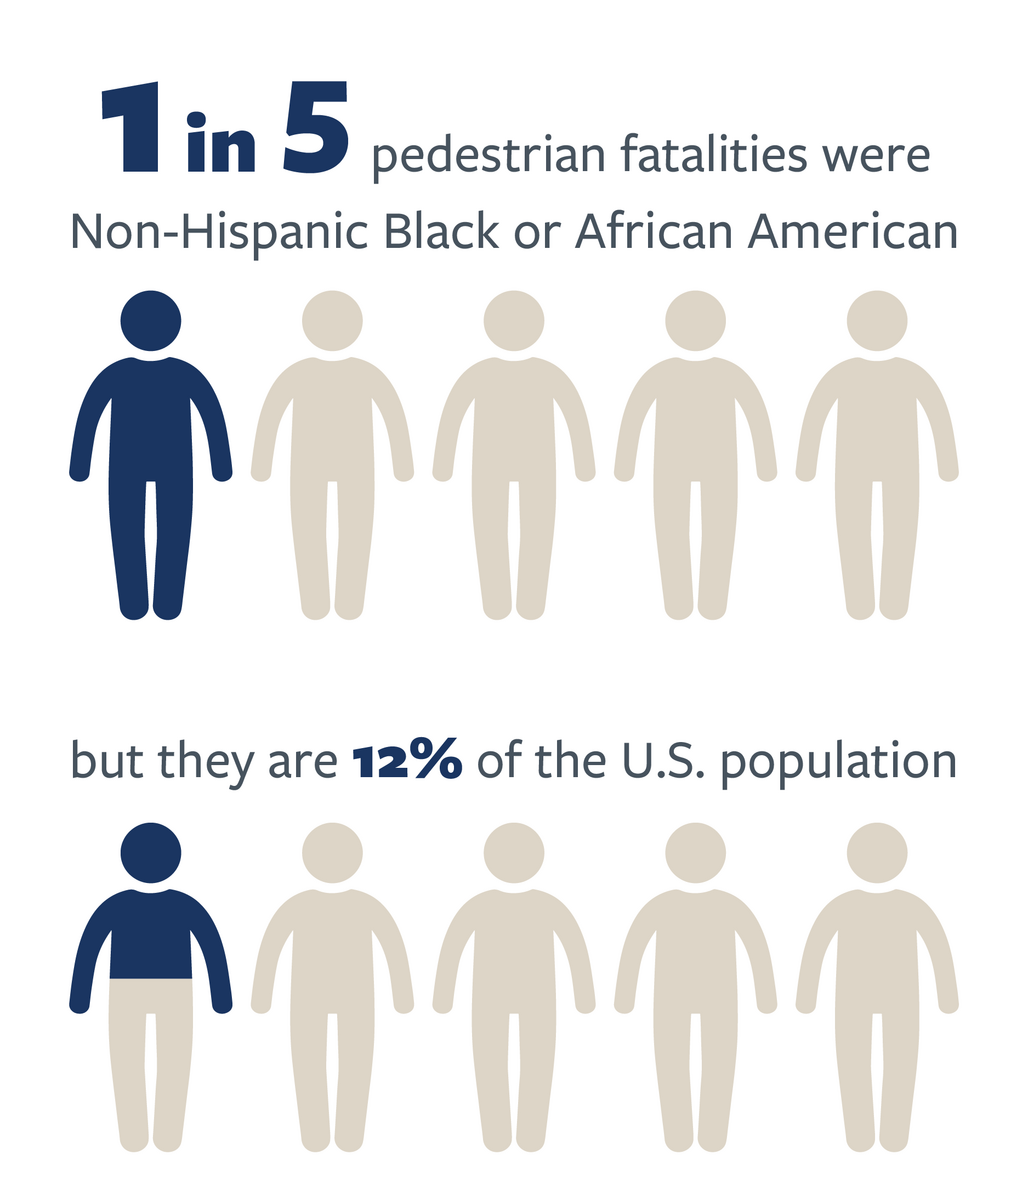 Non-Hispanic Black or African American Pedestrian Fatalities Rate from 2015 to 2019. For more information, please see the following summary. 